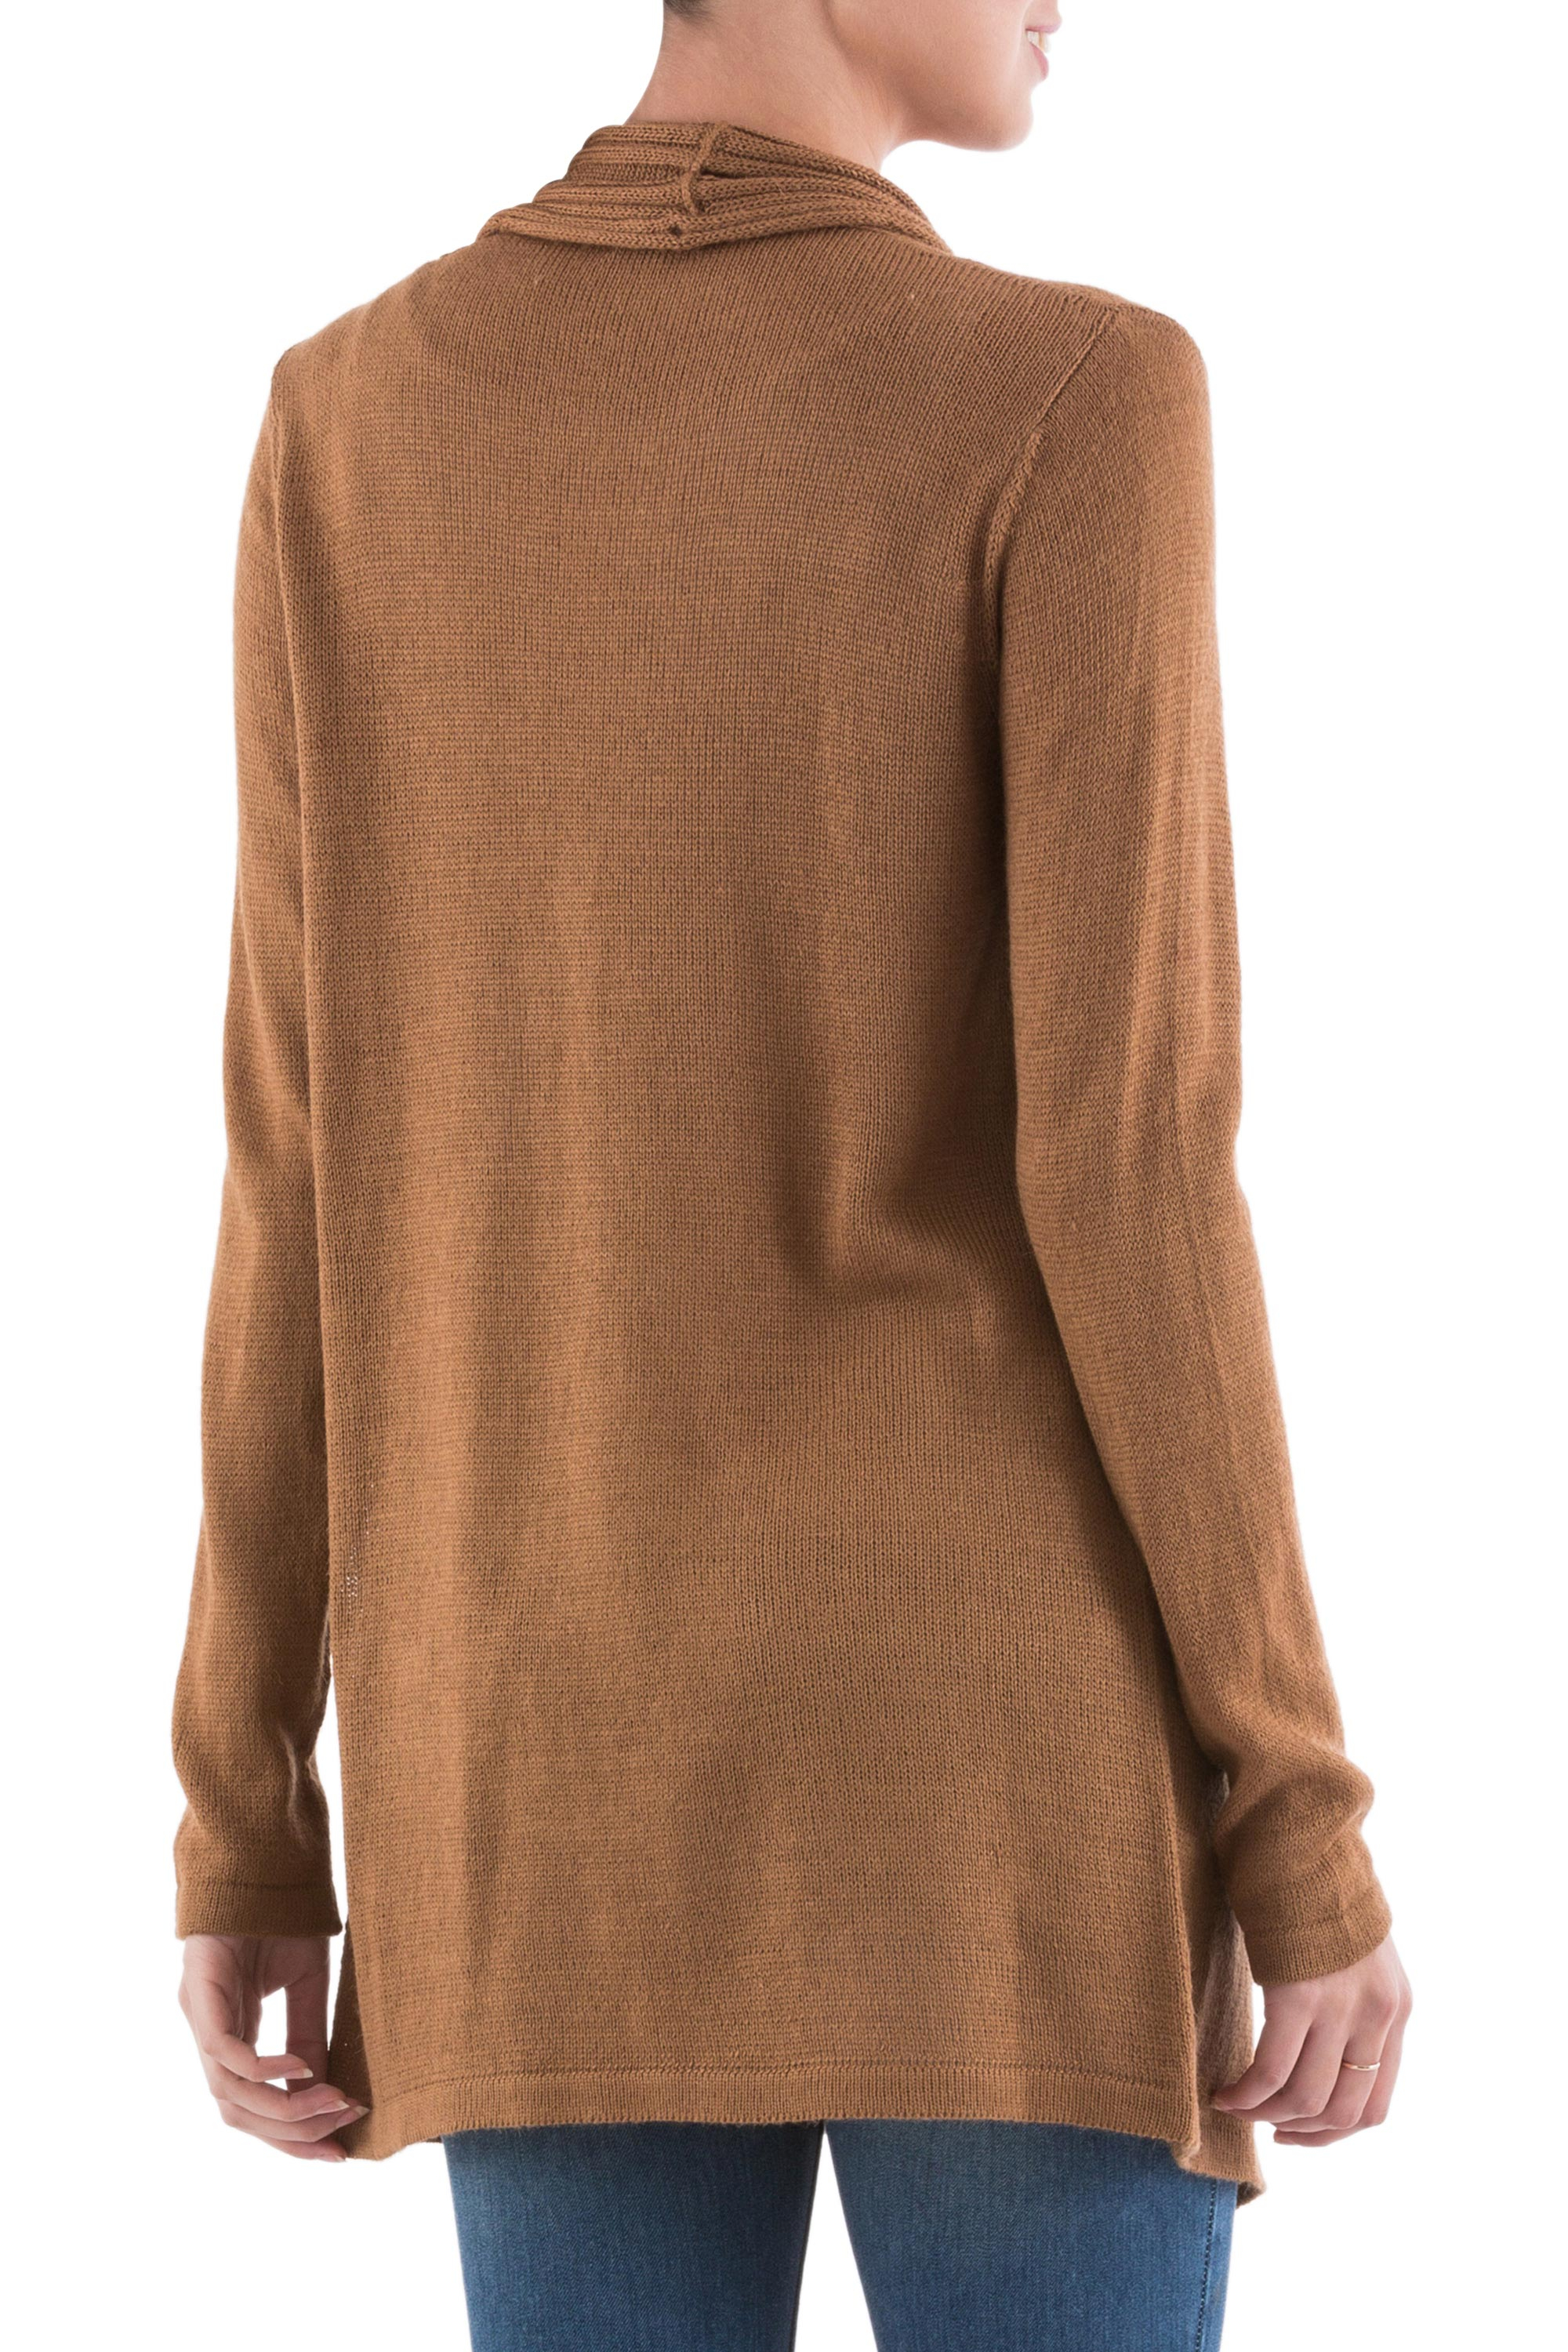 Long Sleeved Brown Cardigan Sweater from Peru - Copper Waterfall Dream ...